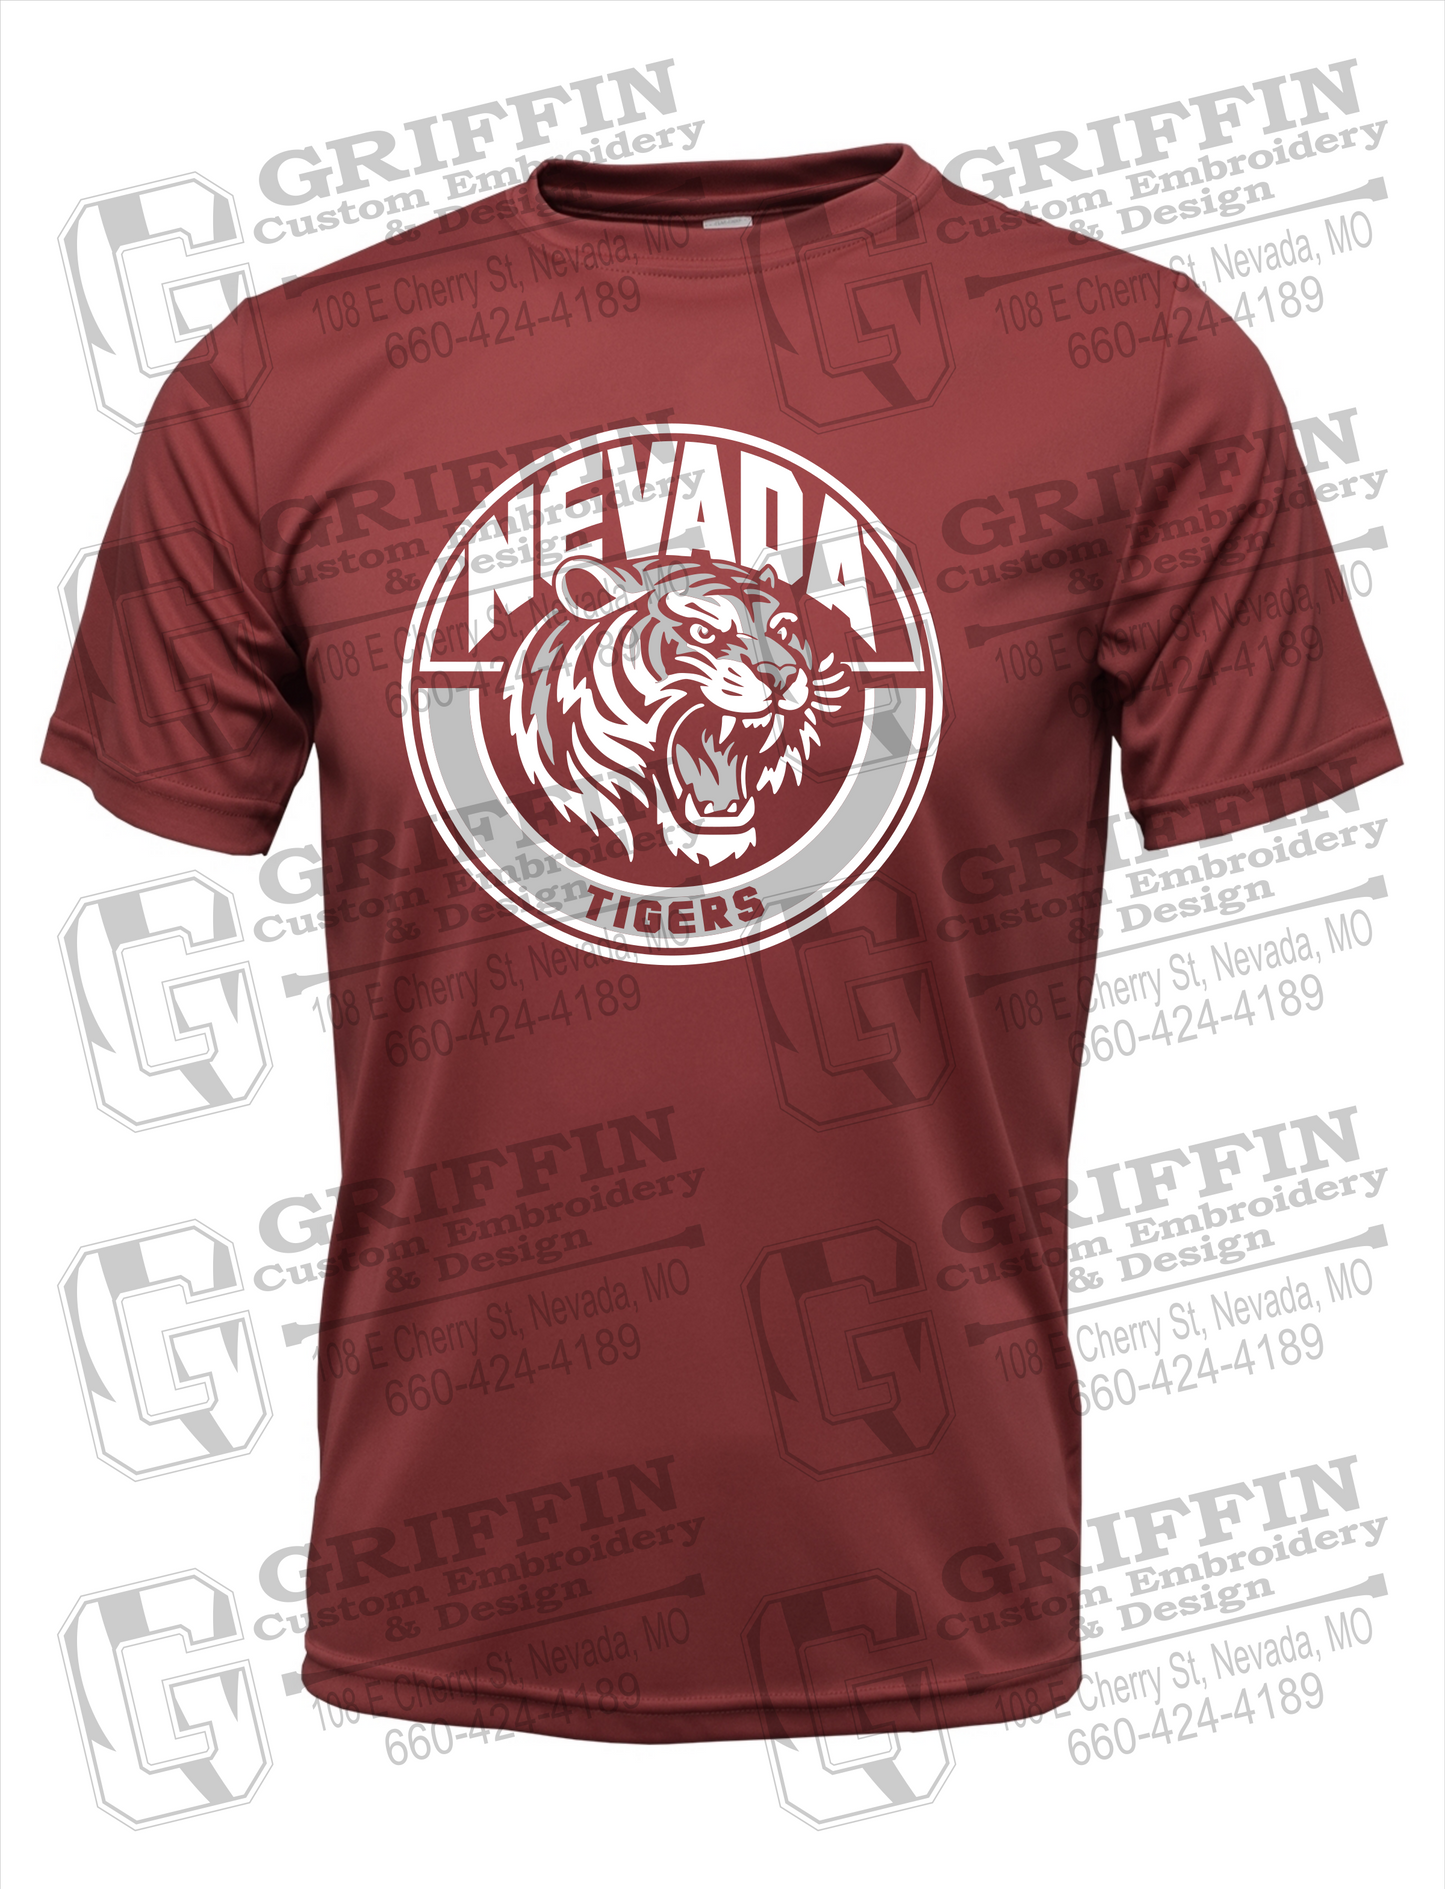 Nevada Tigers 24-H Dry-Fit T-Shirt